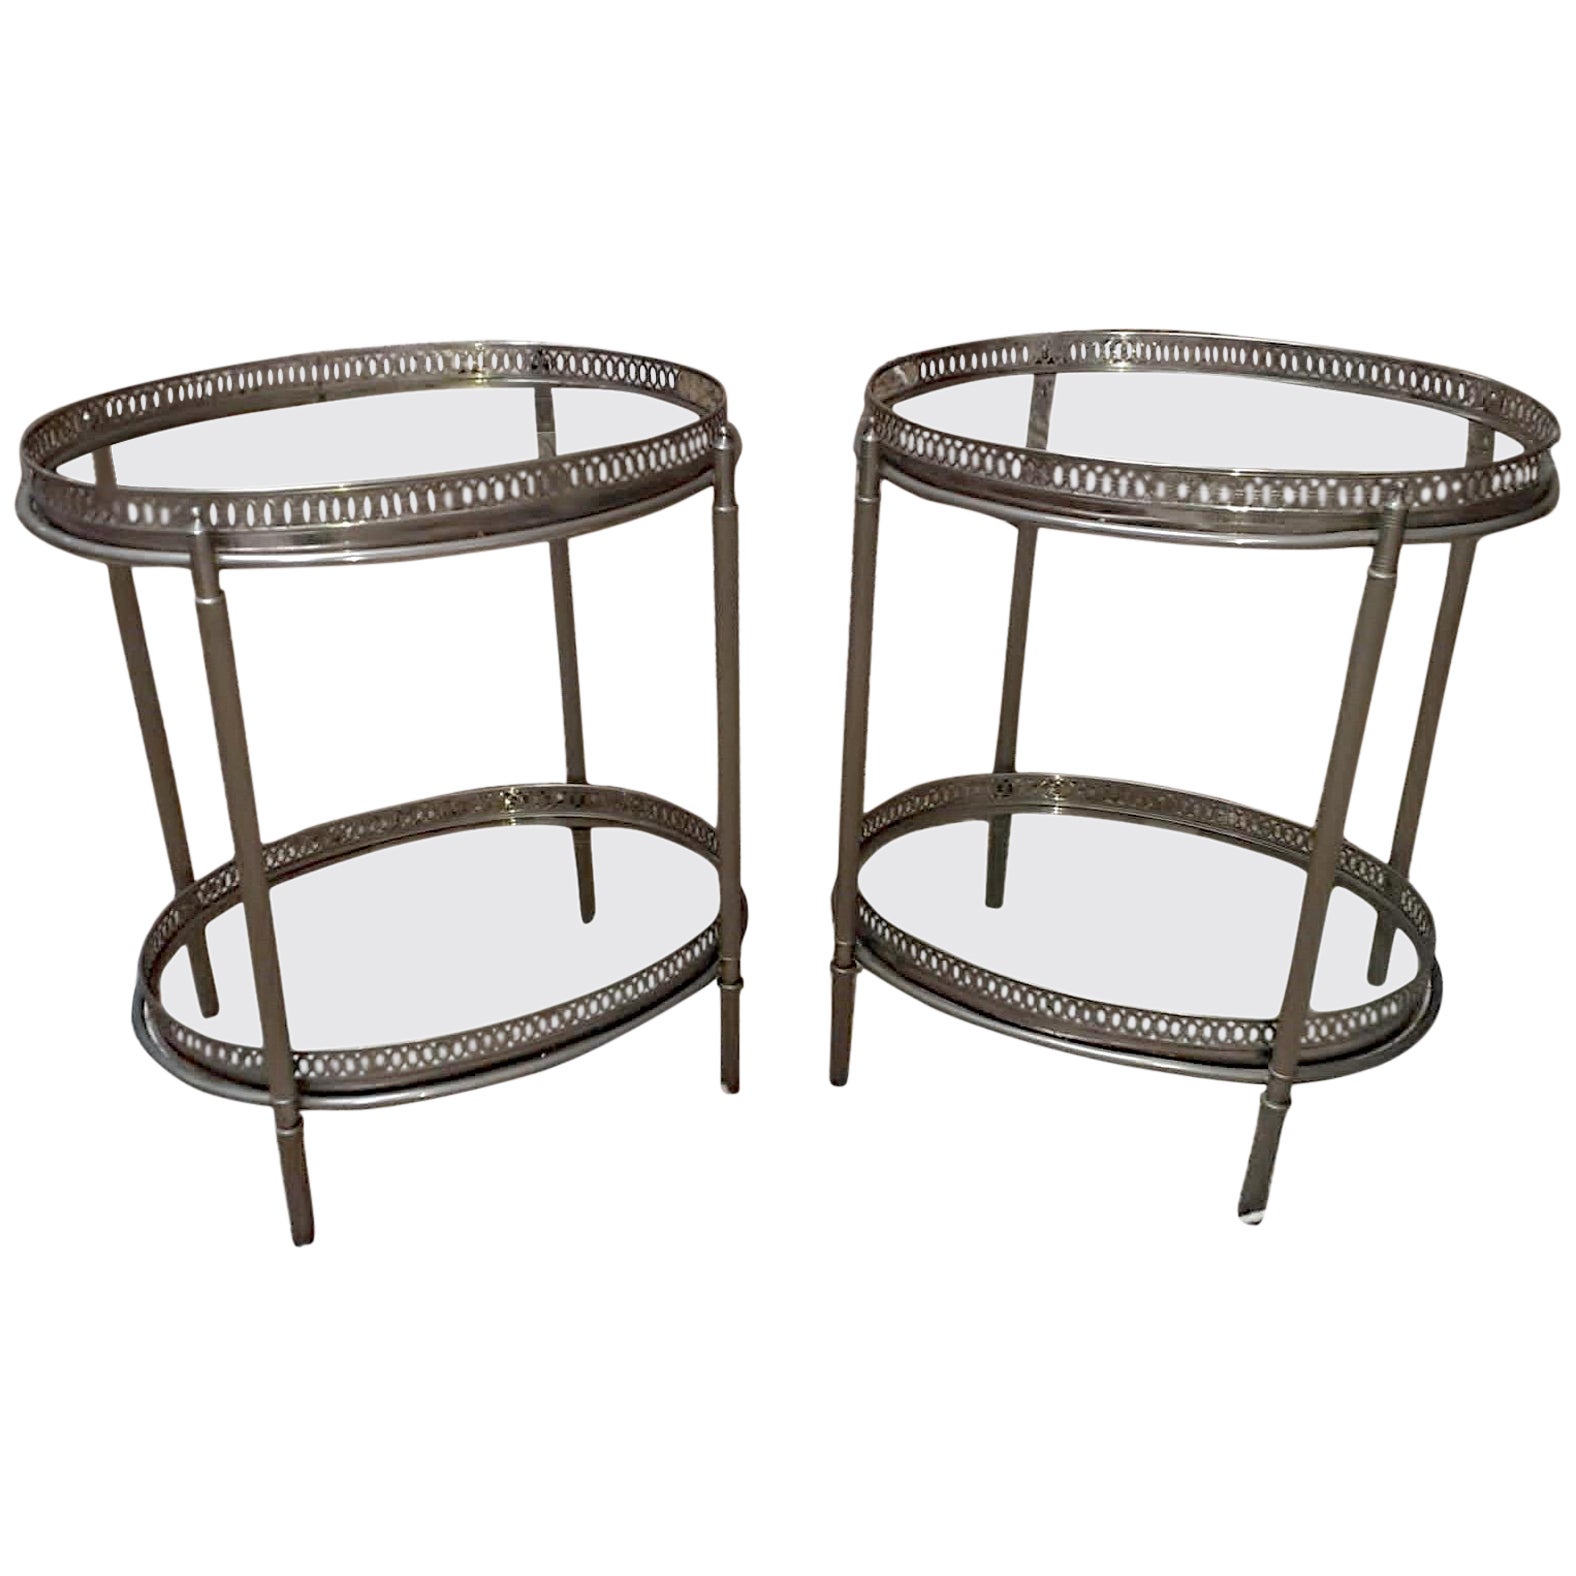 Maison Baguès, Elegant Pair of Side Tables in Silver Metal circa 1960 For Sale